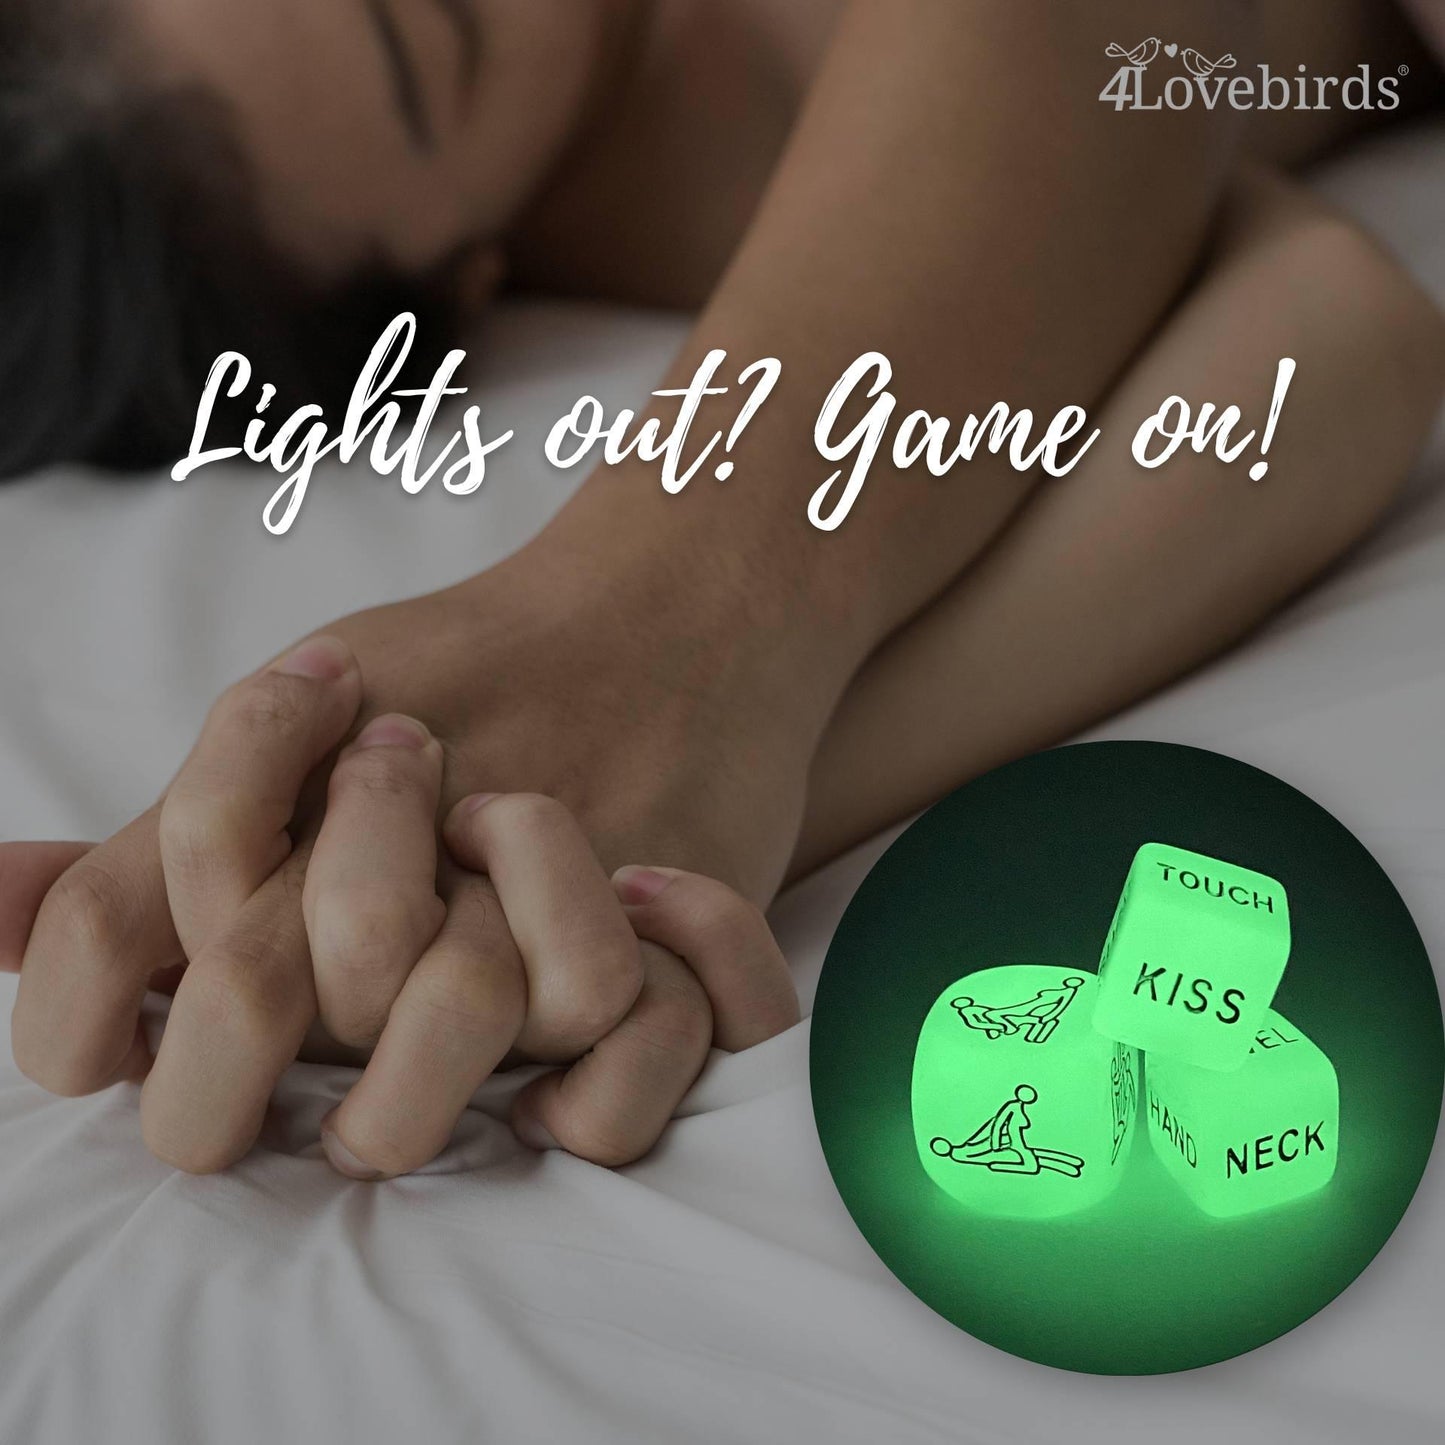 Sex Dice Game With Sex Positions - Glow in the Dark Bedroom Game, Fun Sex Toy For Wife and Husband (6 Dice) - 4Lovebirds